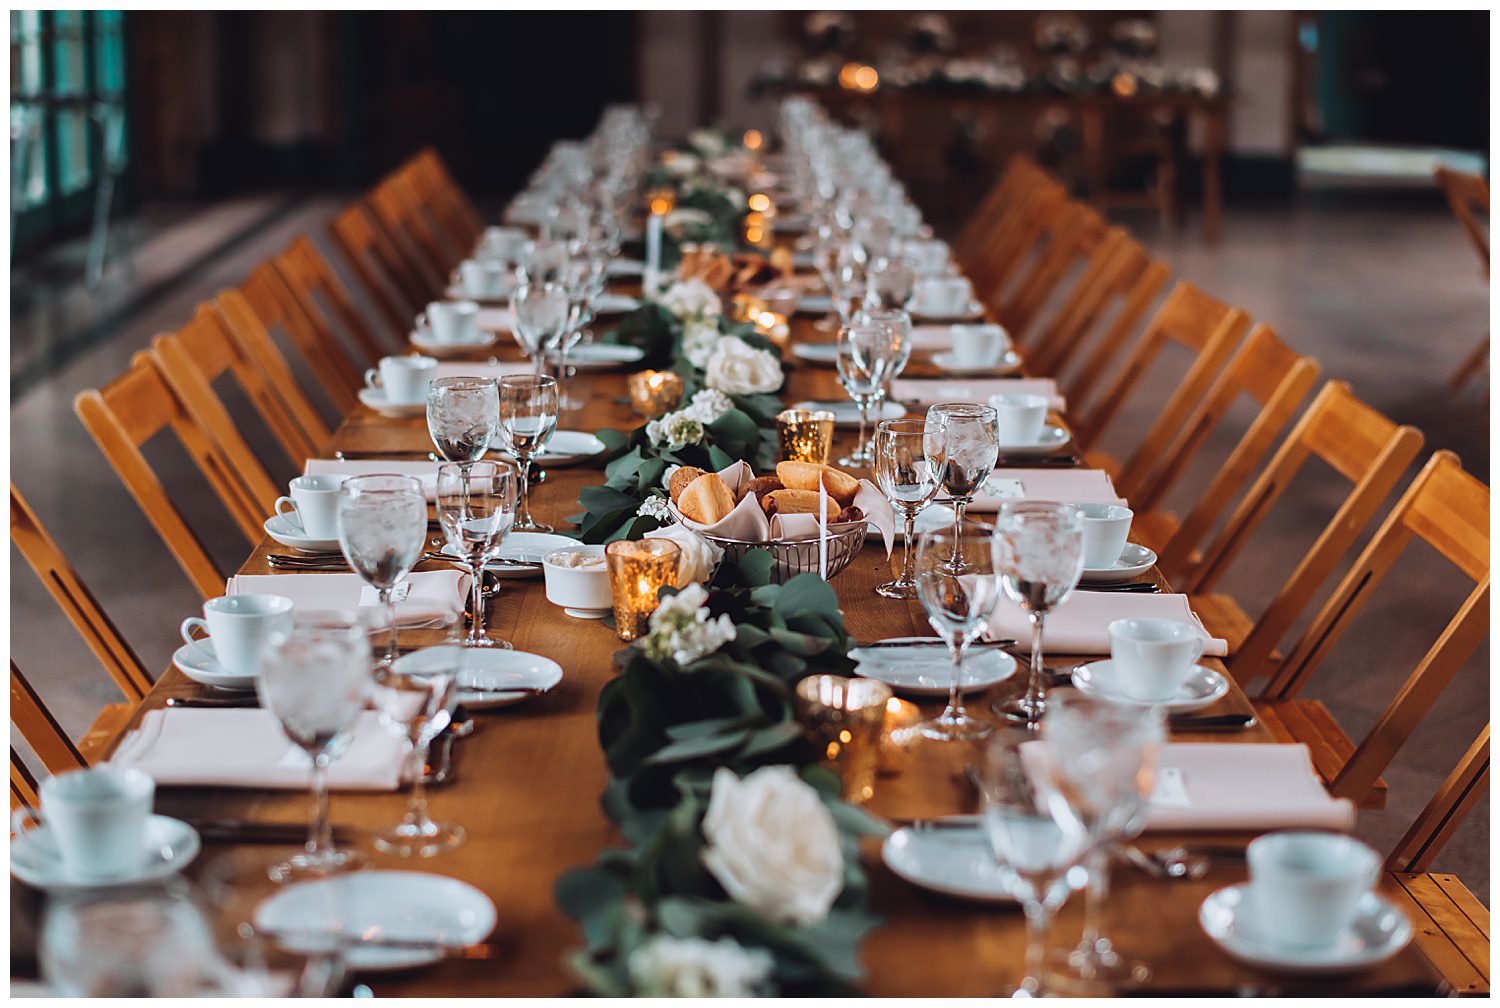 Columbus Park Refectory Wedding, reception space details, table setting, greenery